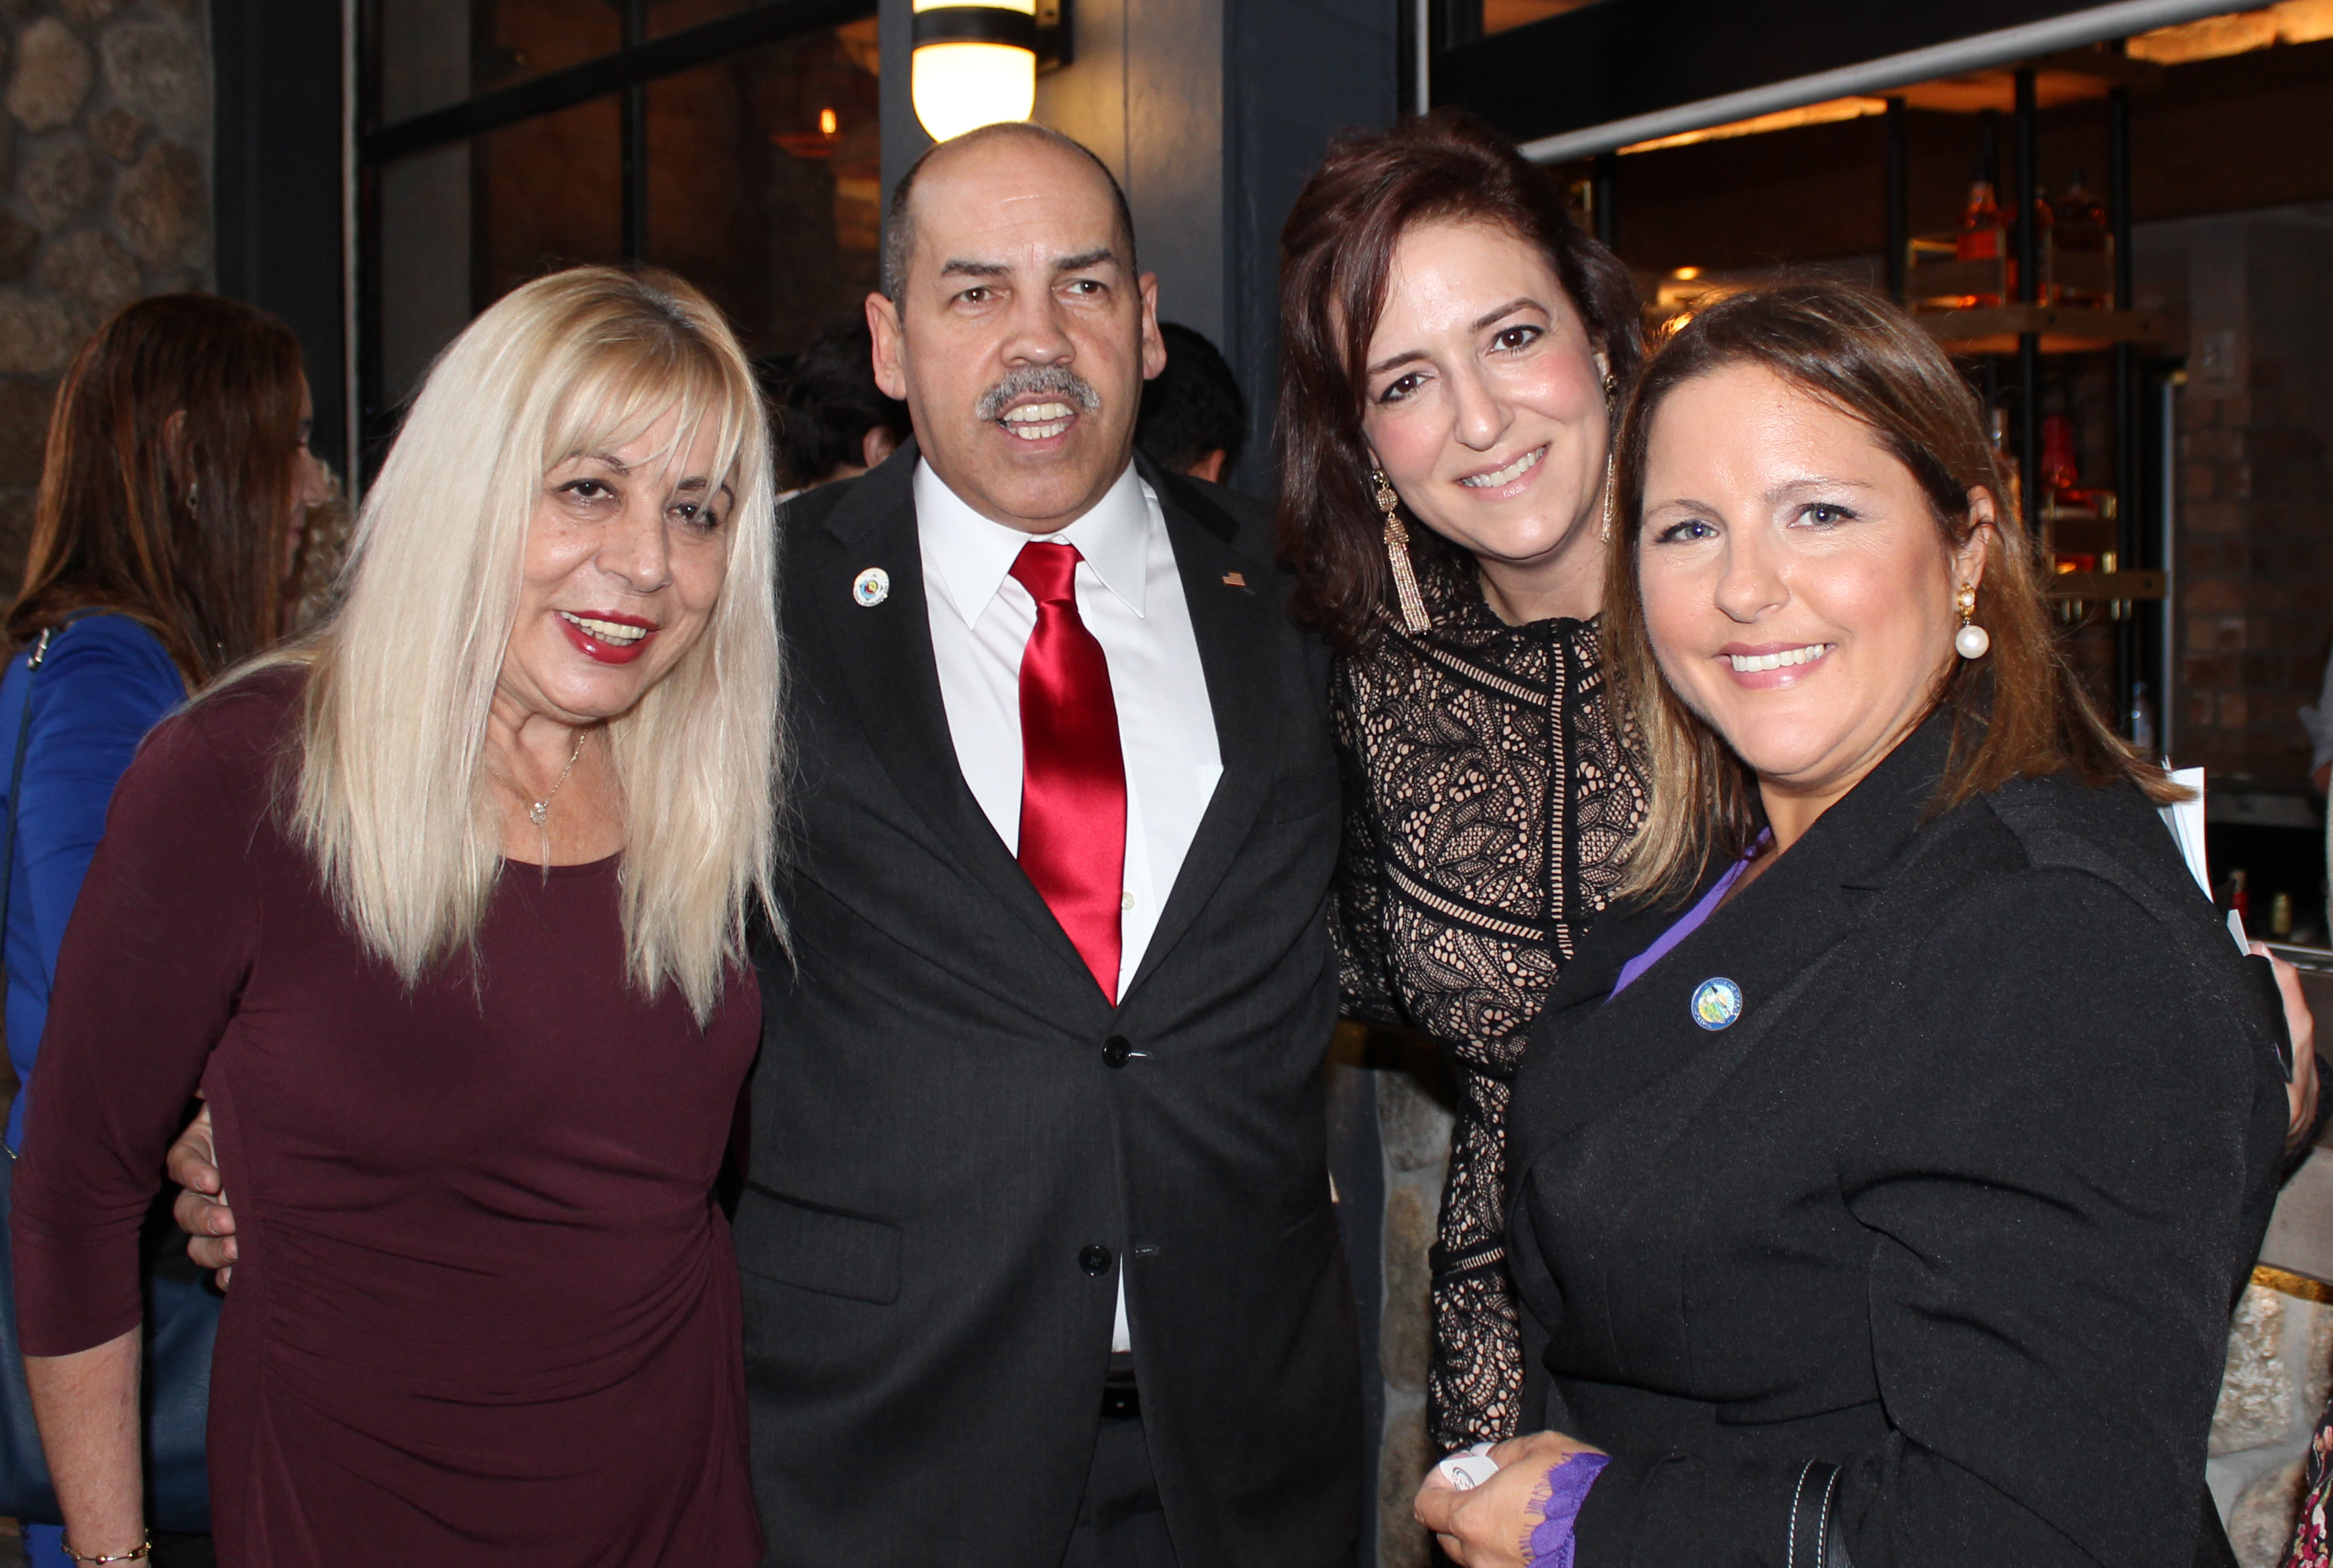 Doral Chamber of Commerce introduces Novecento Grand Opening, group photo with Manny Sarmiento and Carmen Lopez.